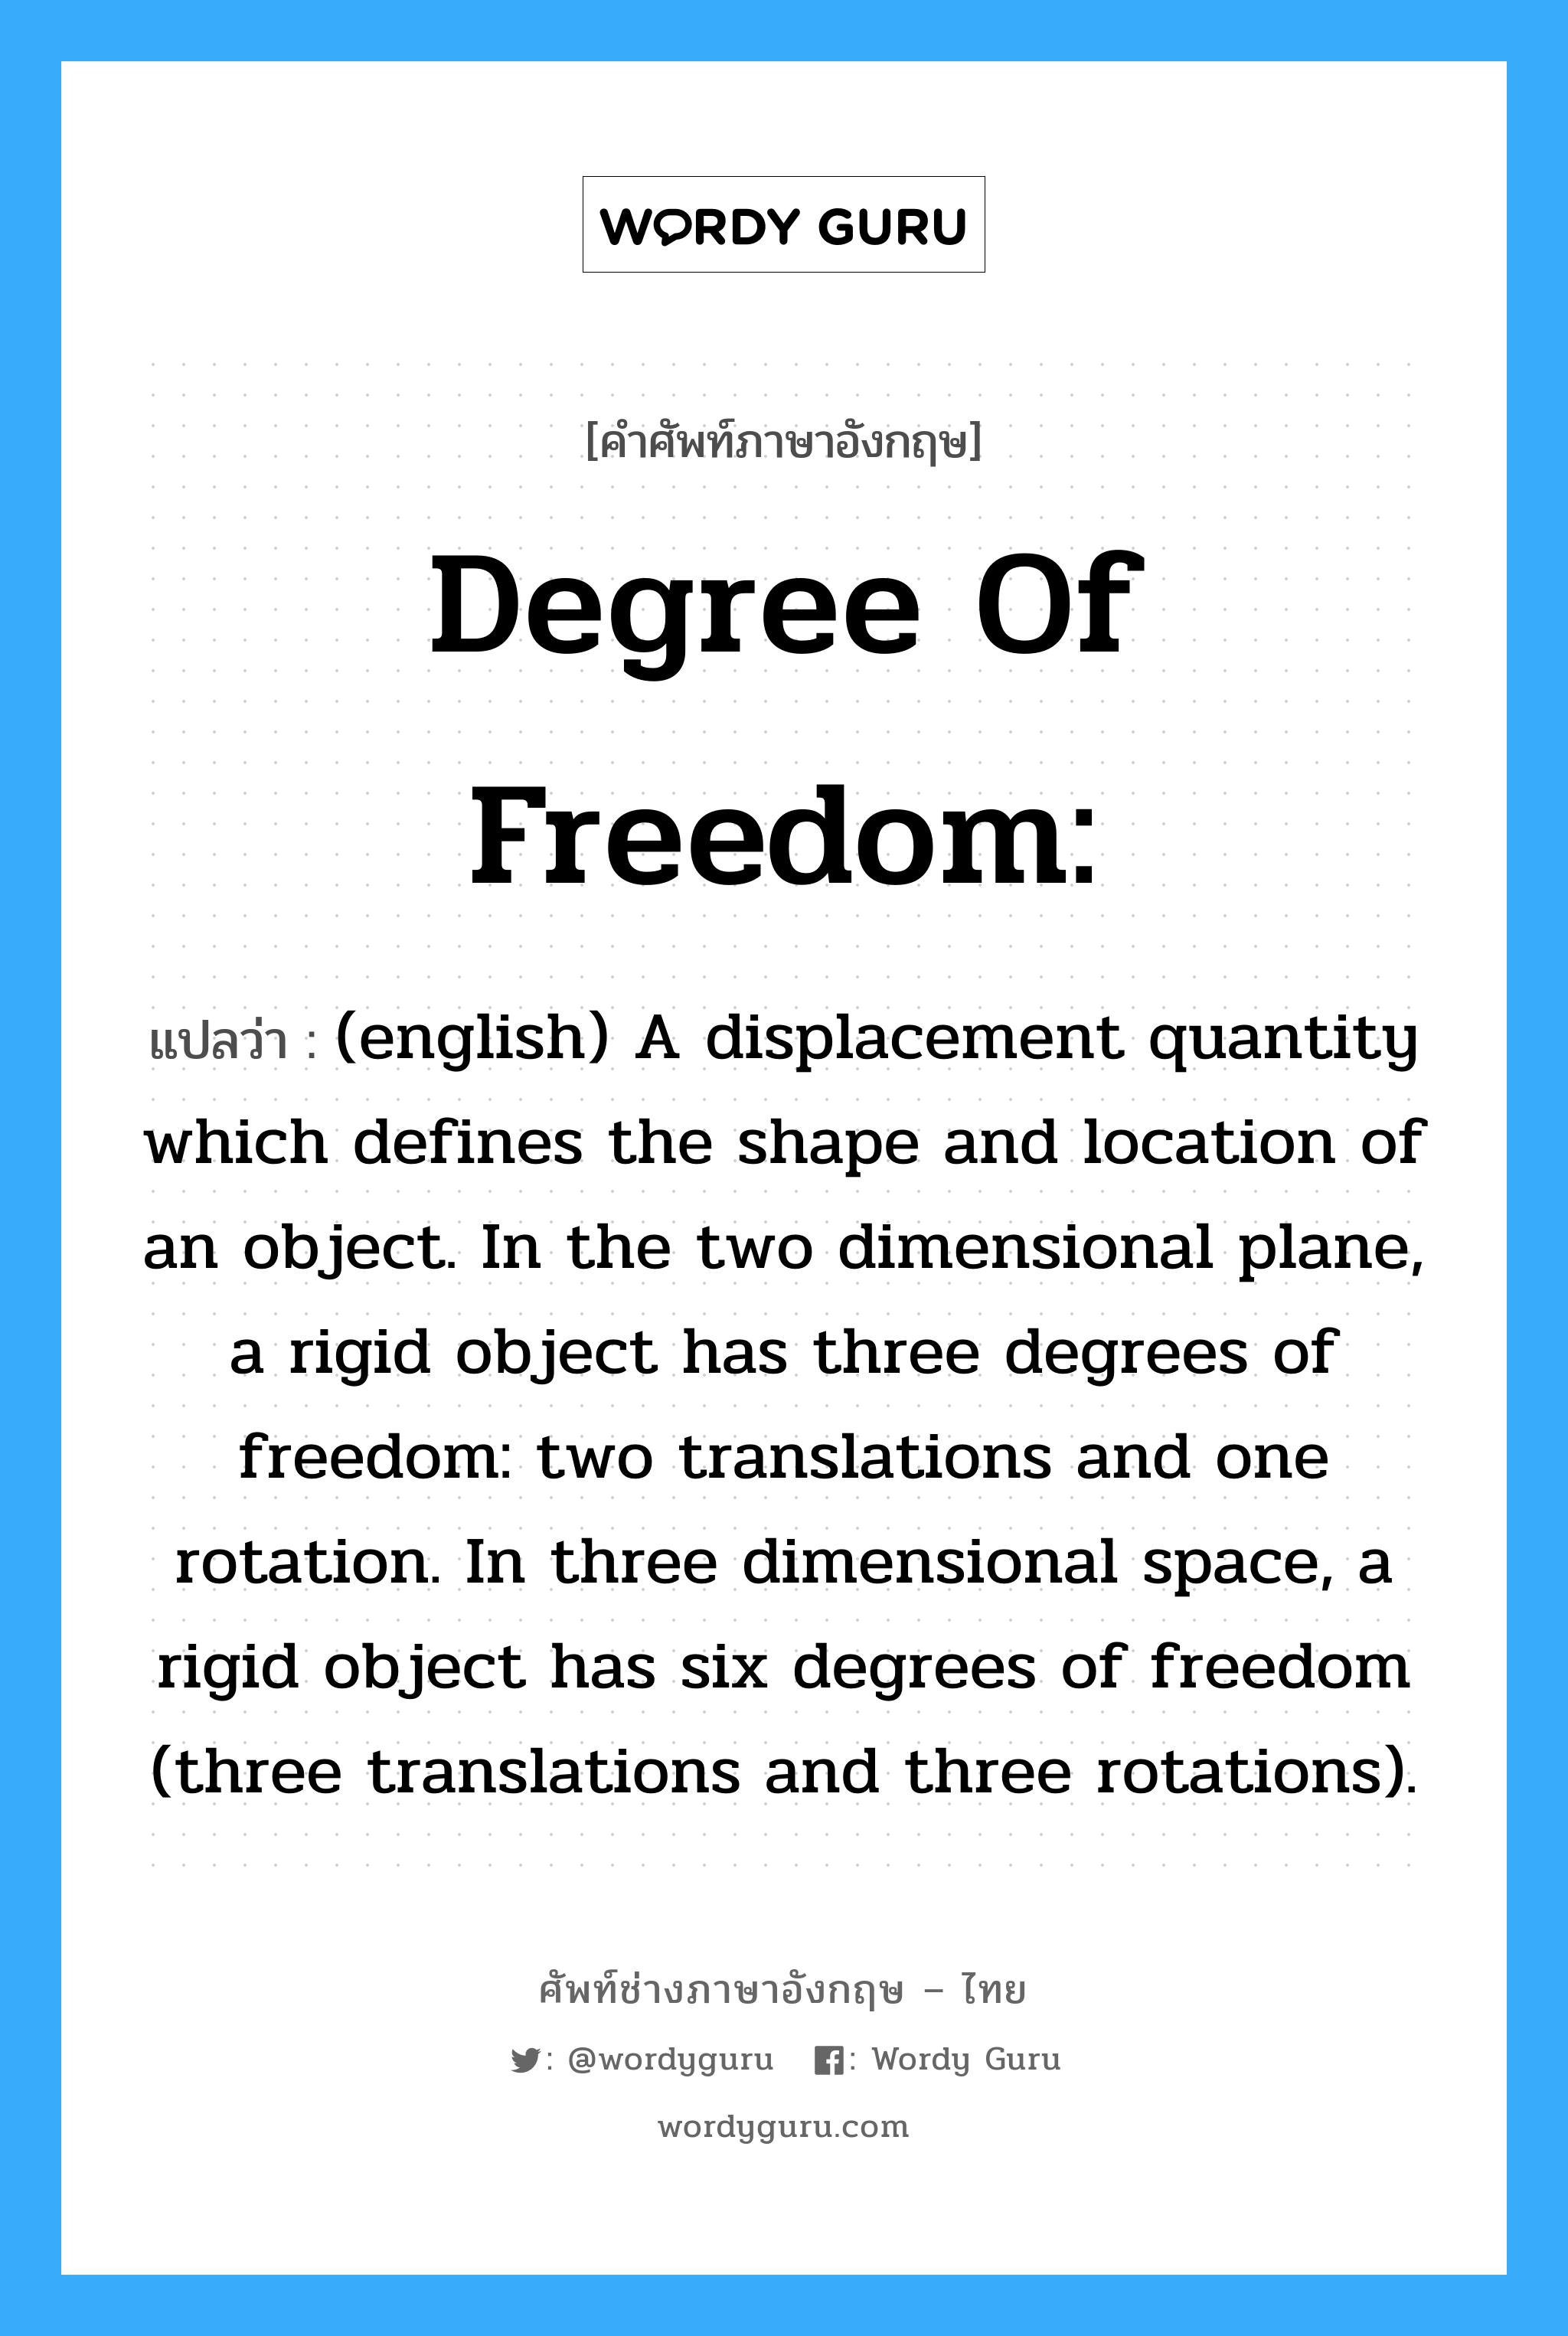 Degree of Freedom: แปลว่า?, คำศัพท์ช่างภาษาอังกฤษ - ไทย Degree of Freedom: คำศัพท์ภาษาอังกฤษ Degree of Freedom: แปลว่า (english) A displacement quantity which defines the shape and location of an object. In the two dimensional plane, a rigid object has three degrees of freedom: two translations and one rotation. In three dimensional space, a rigid object has six degrees of freedom (three translations and three rotations).